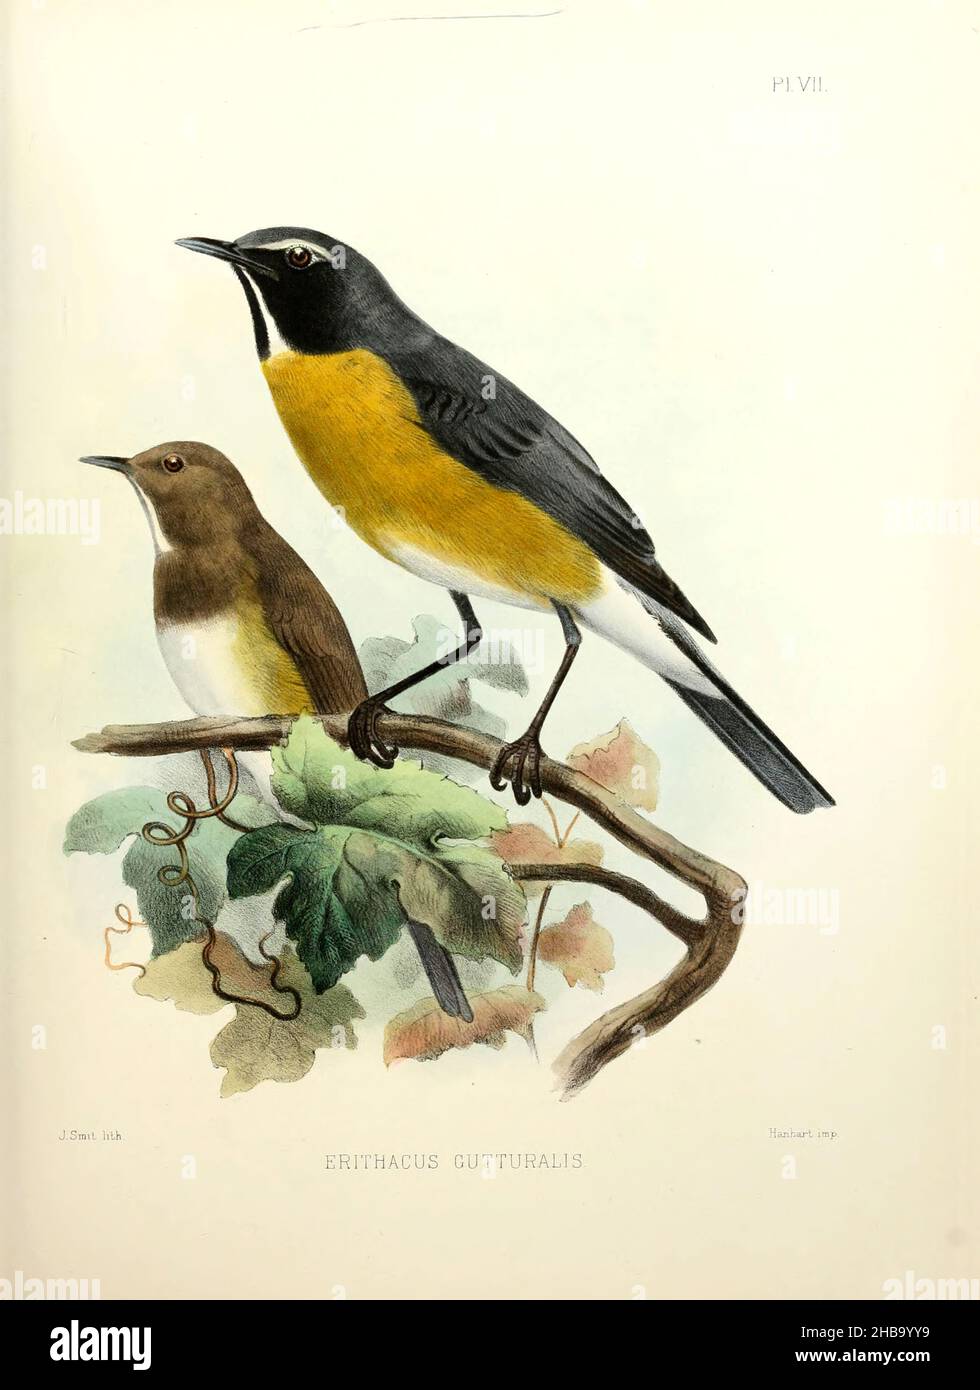 Illustration of a male and female white-throated robin (Irania gutturalis, here as Erithacus gutturalis), or irania, a small, sexually dimorphic, migratory passerine bird. Illustration from 'The Survey of Western Palestine. The Fauna and Flora of Palestine' by Henry Baker Tristram (1822-1906). Published by The Committee of the Palestine Exploration Fund, London, 1884. Stock Photo